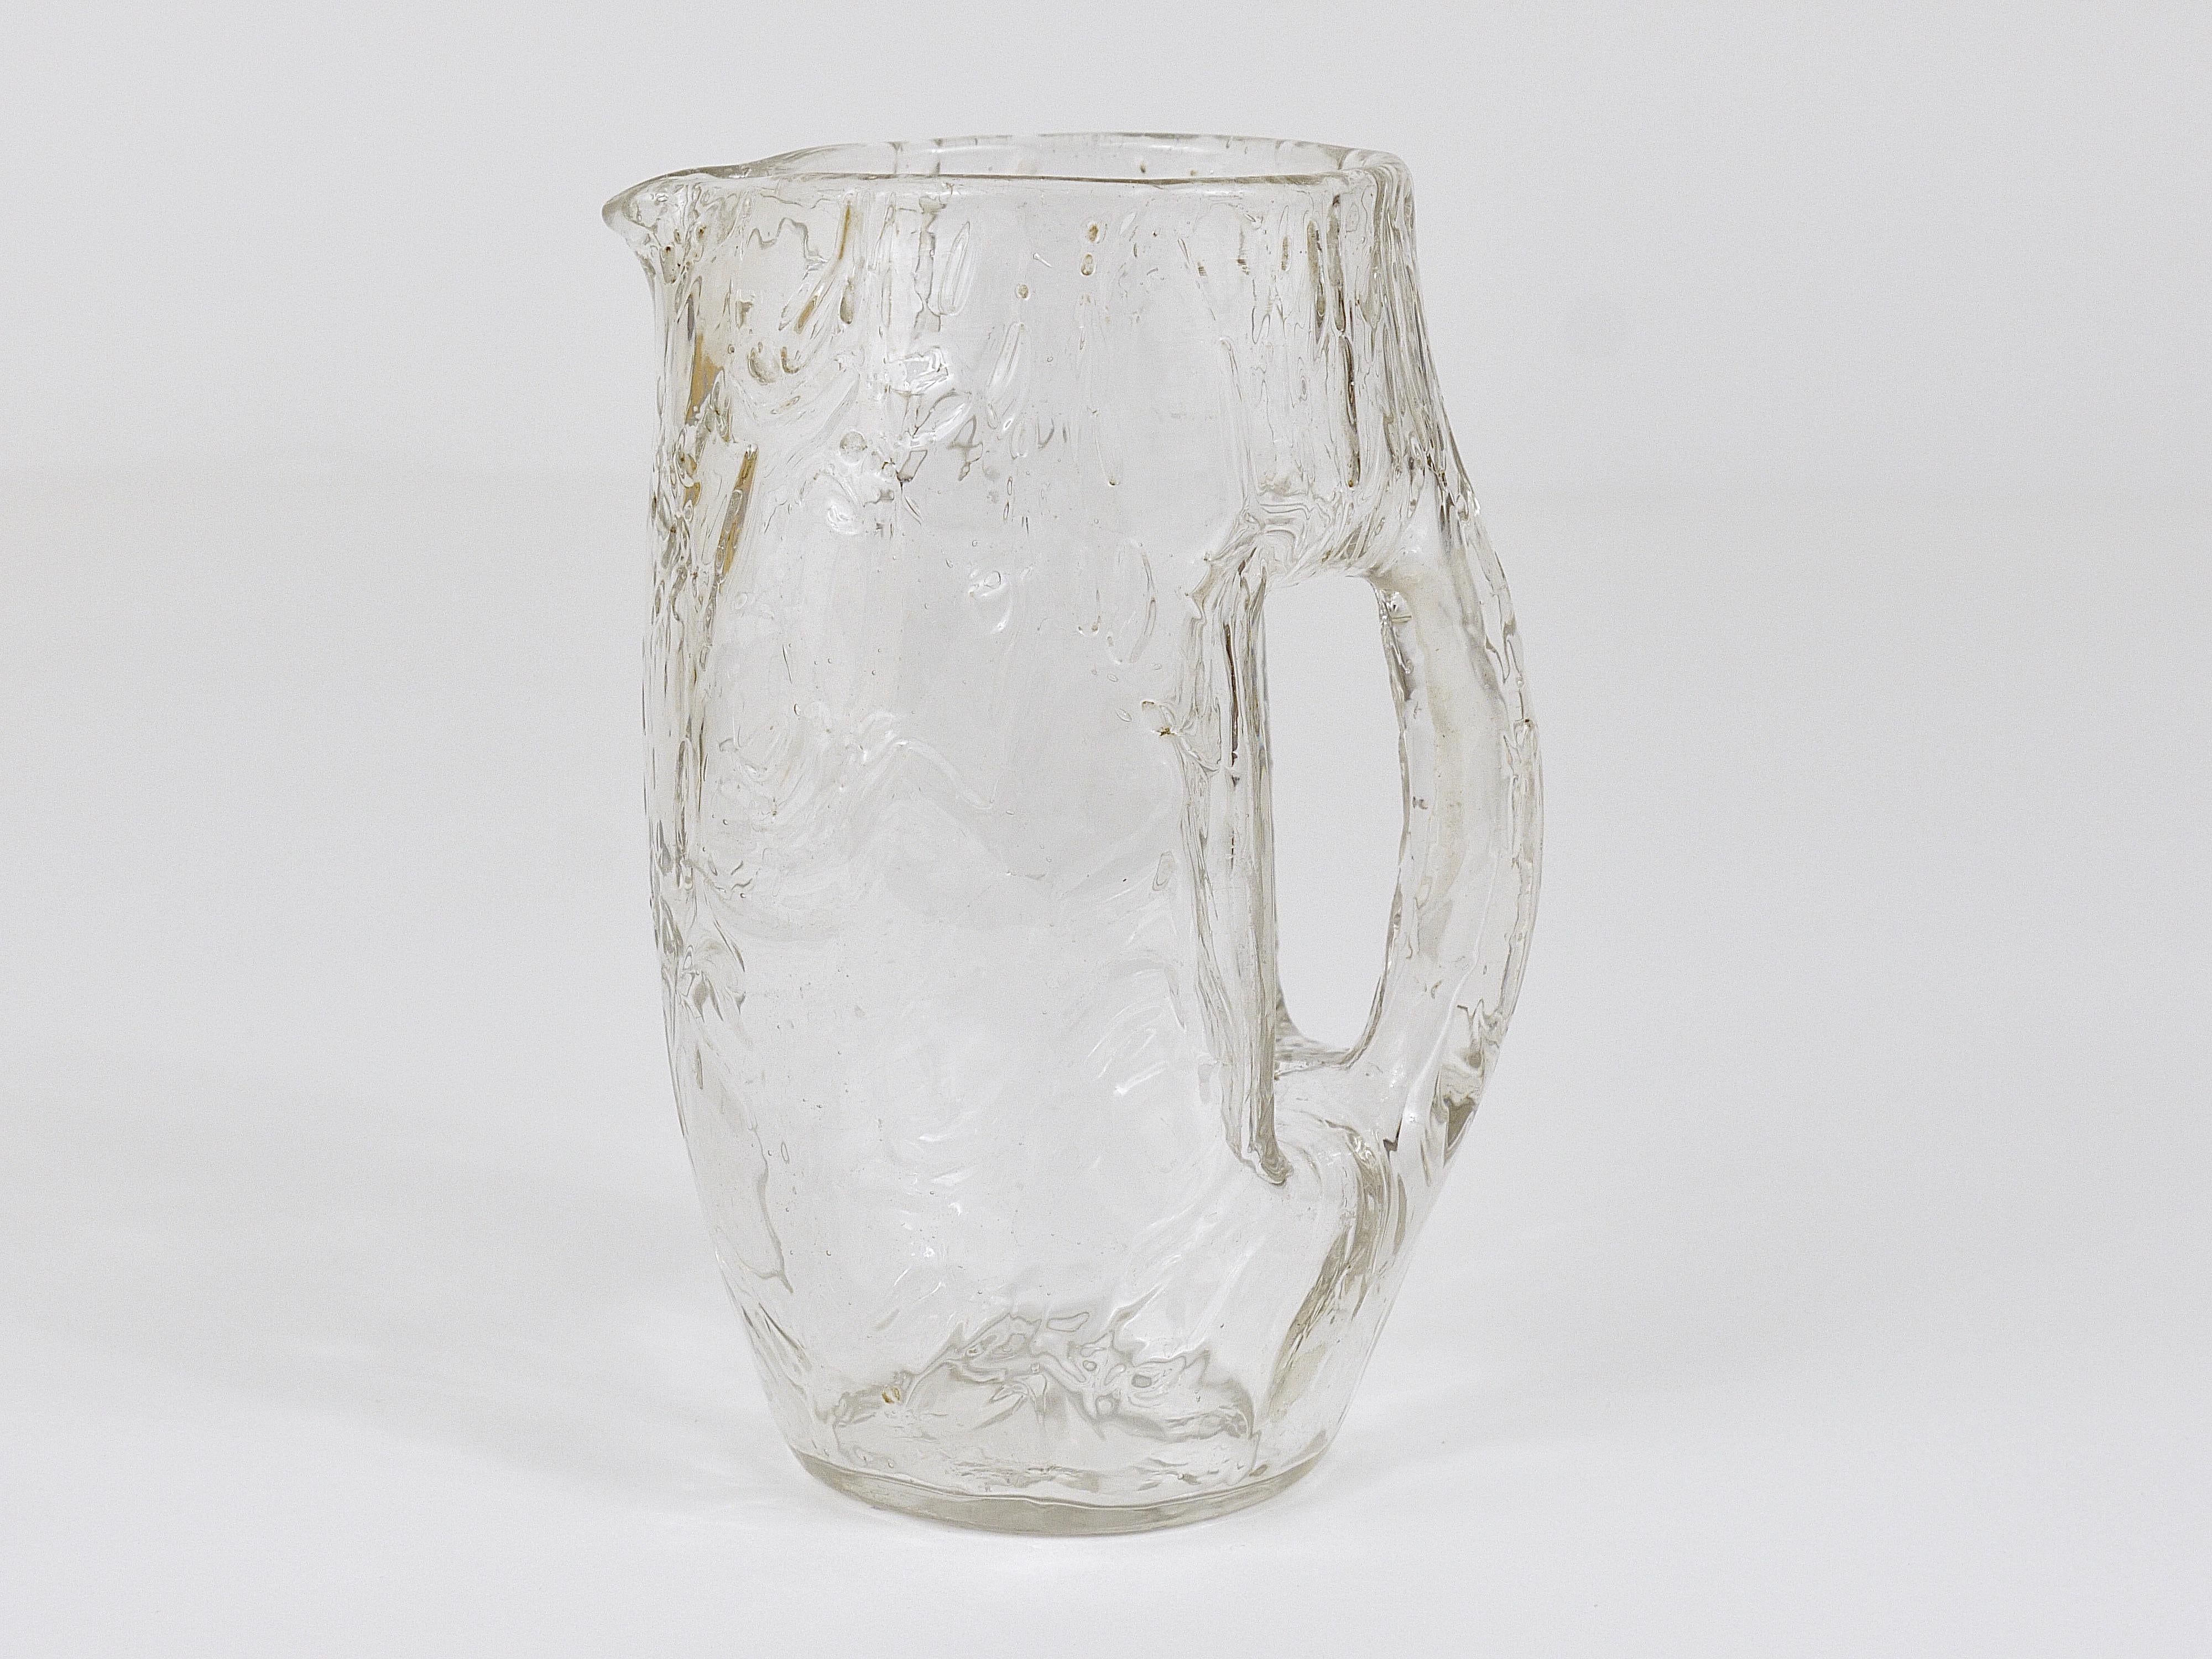 Early 20th Century Koloman Moser Art Nouveau Glass Pitcher by Loetz Witwe, Bohemia, 1900s For Sale